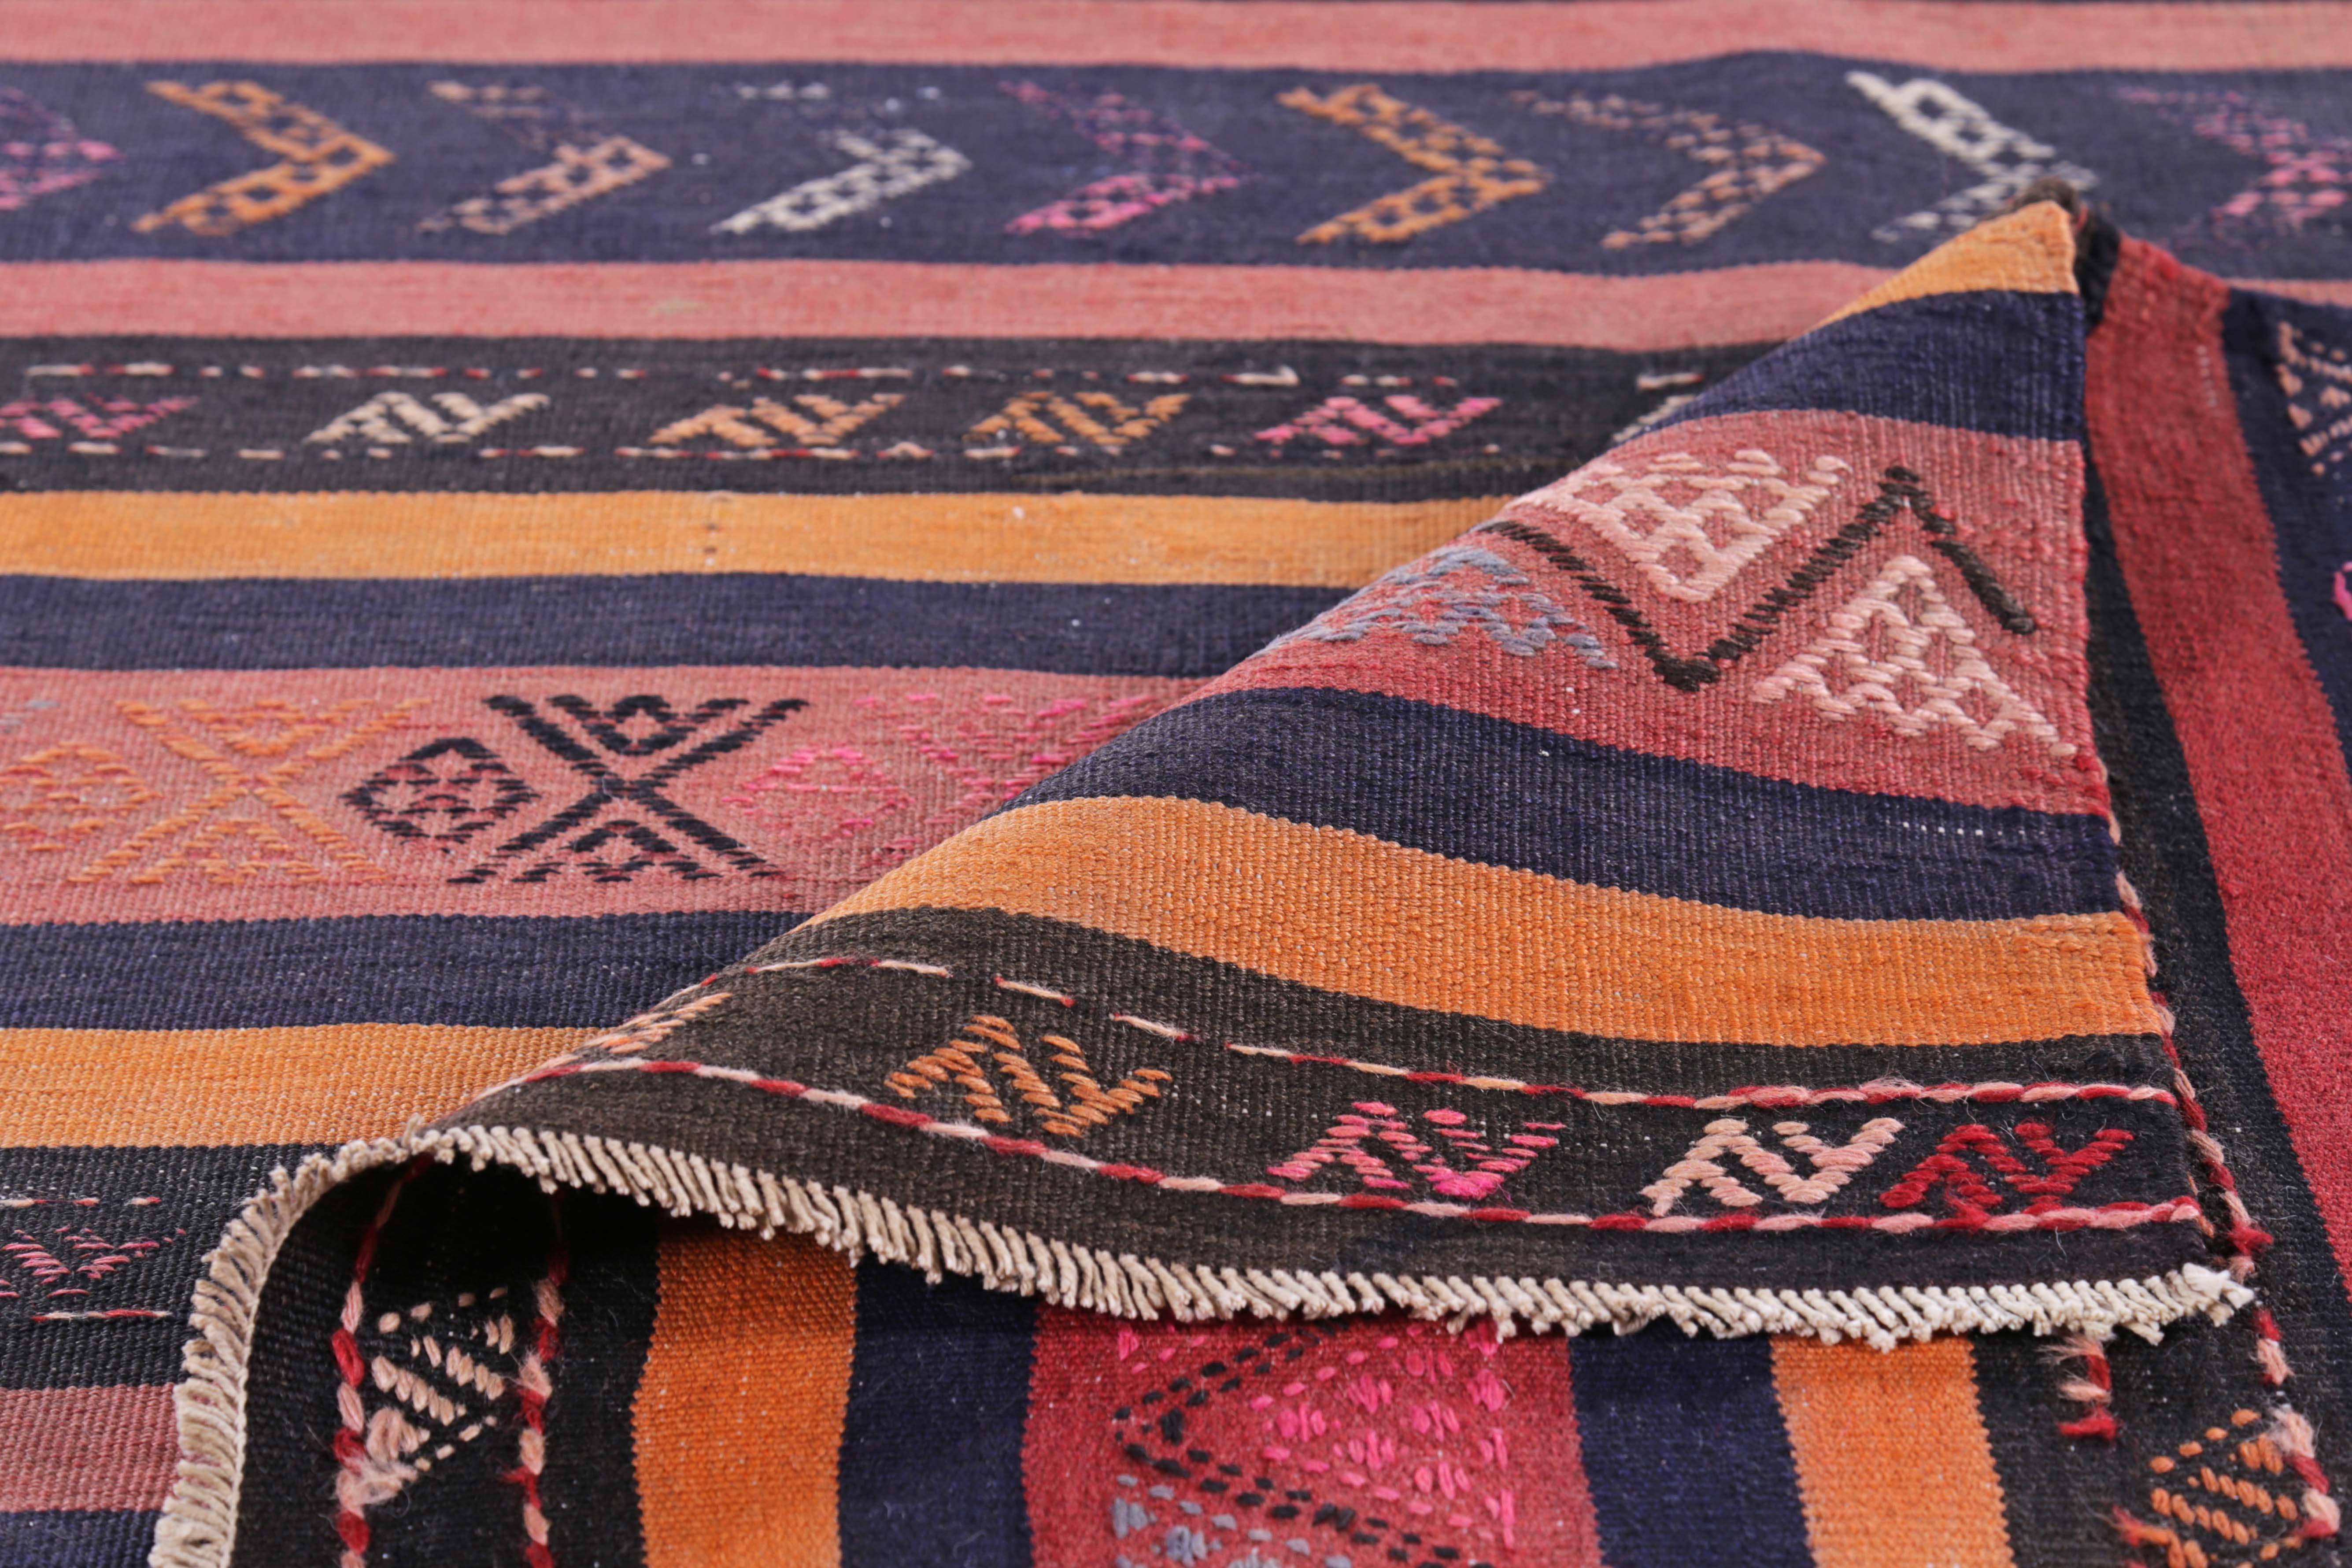 Turkish Kilim Runner Rug with Orange, Blue, Red and Black Tribal Diamonds In New Condition For Sale In Dallas, TX